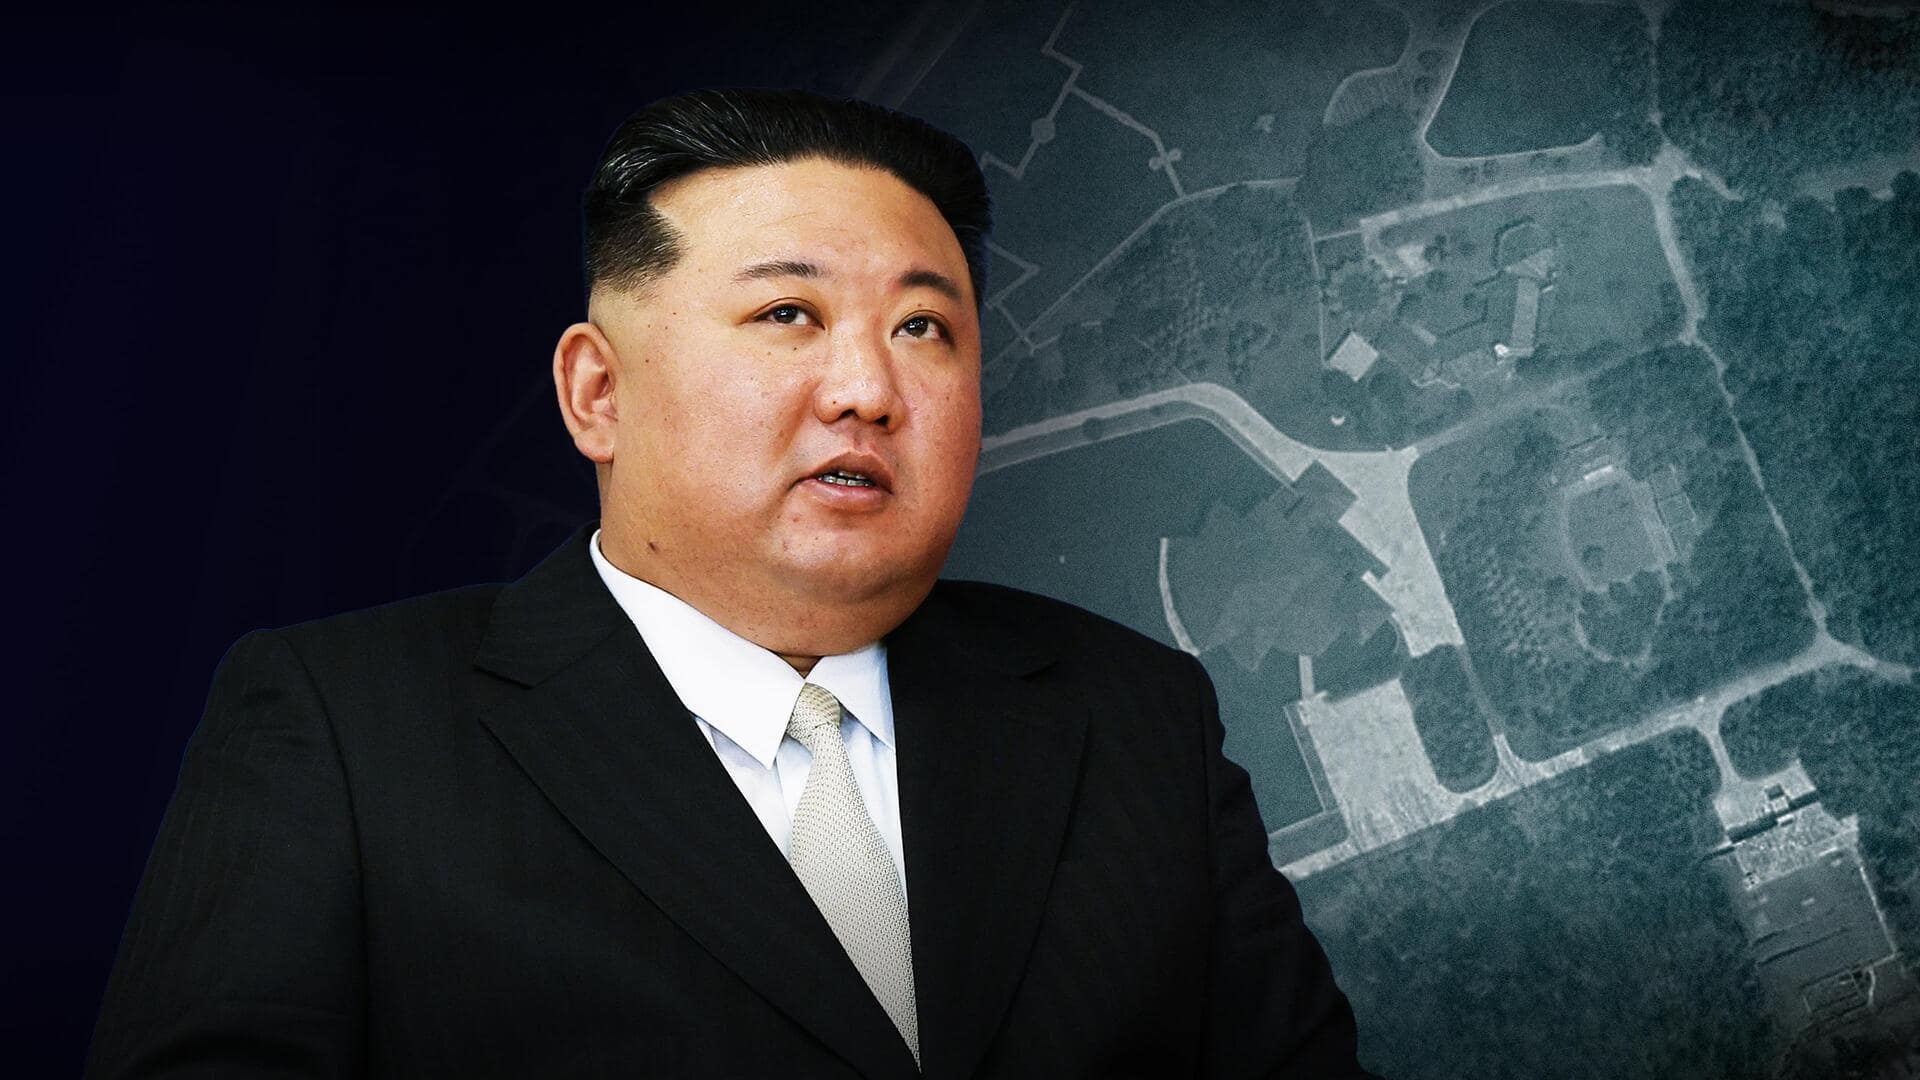 North Korean leader orders demolition of Winter Palace structures